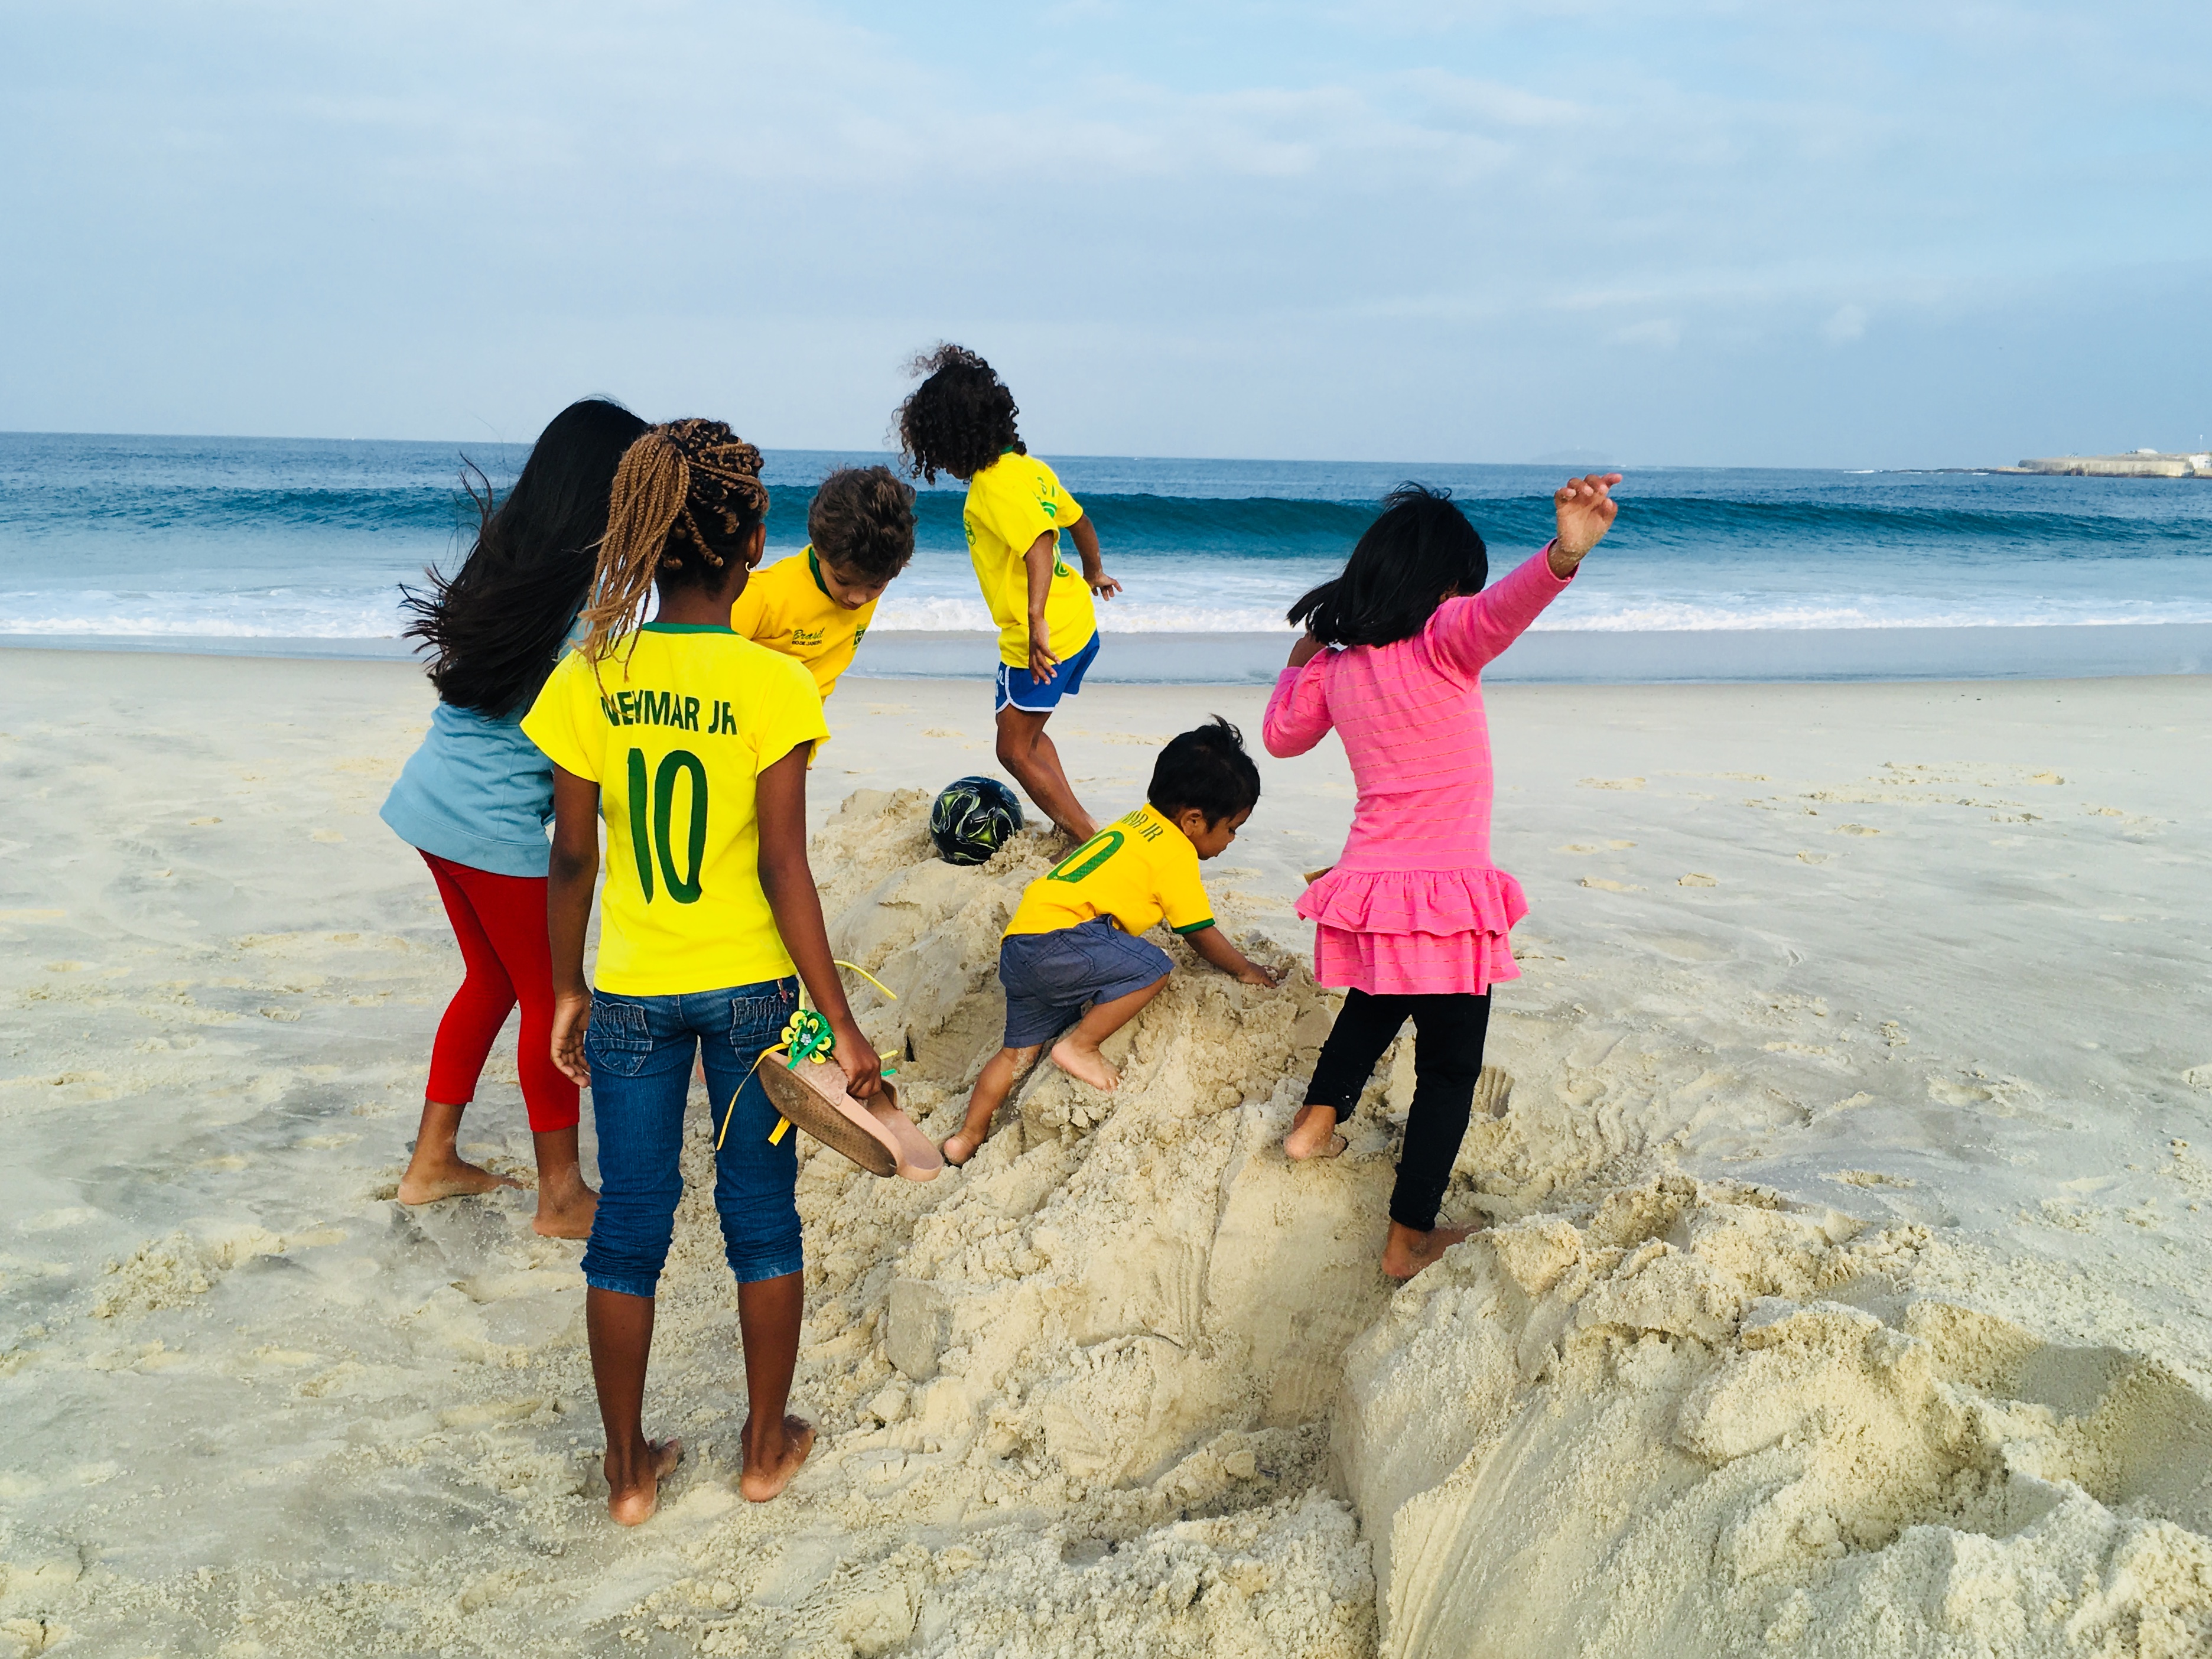 Frolicking in the sand with the favela kids, Rio de Janeiro, Brazil